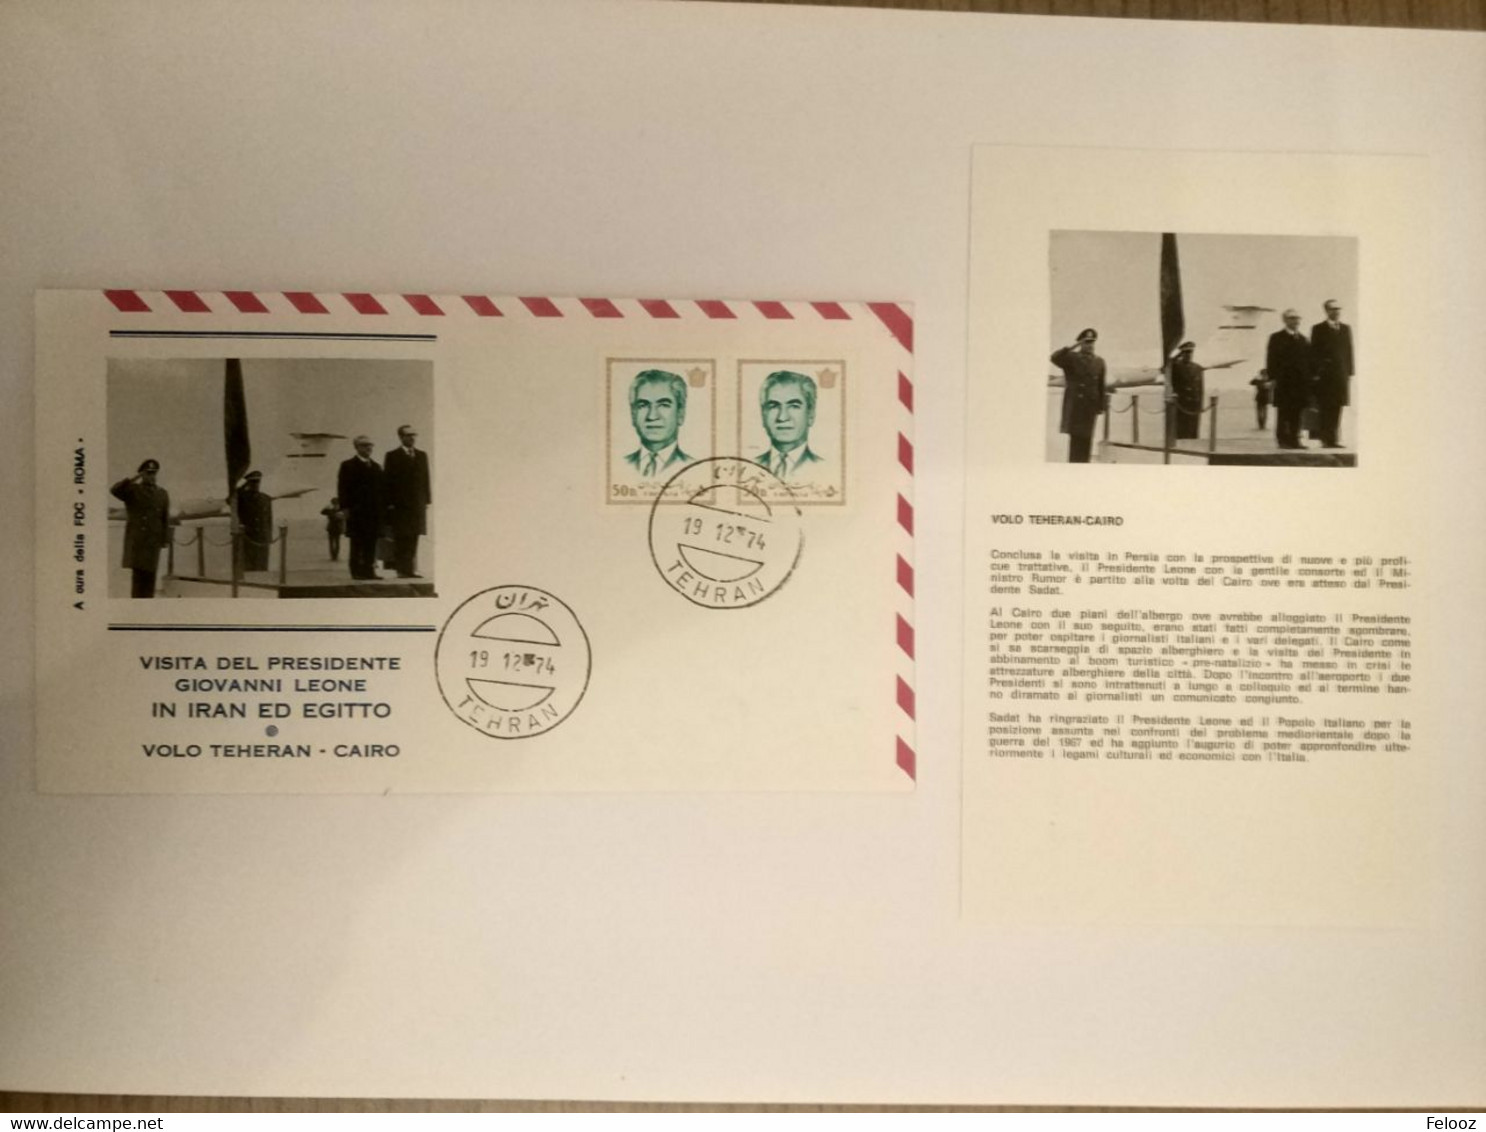 Visit Of Giovanni Leone Italy President From Shah Iran 1974 FDC With Postcard - Iran